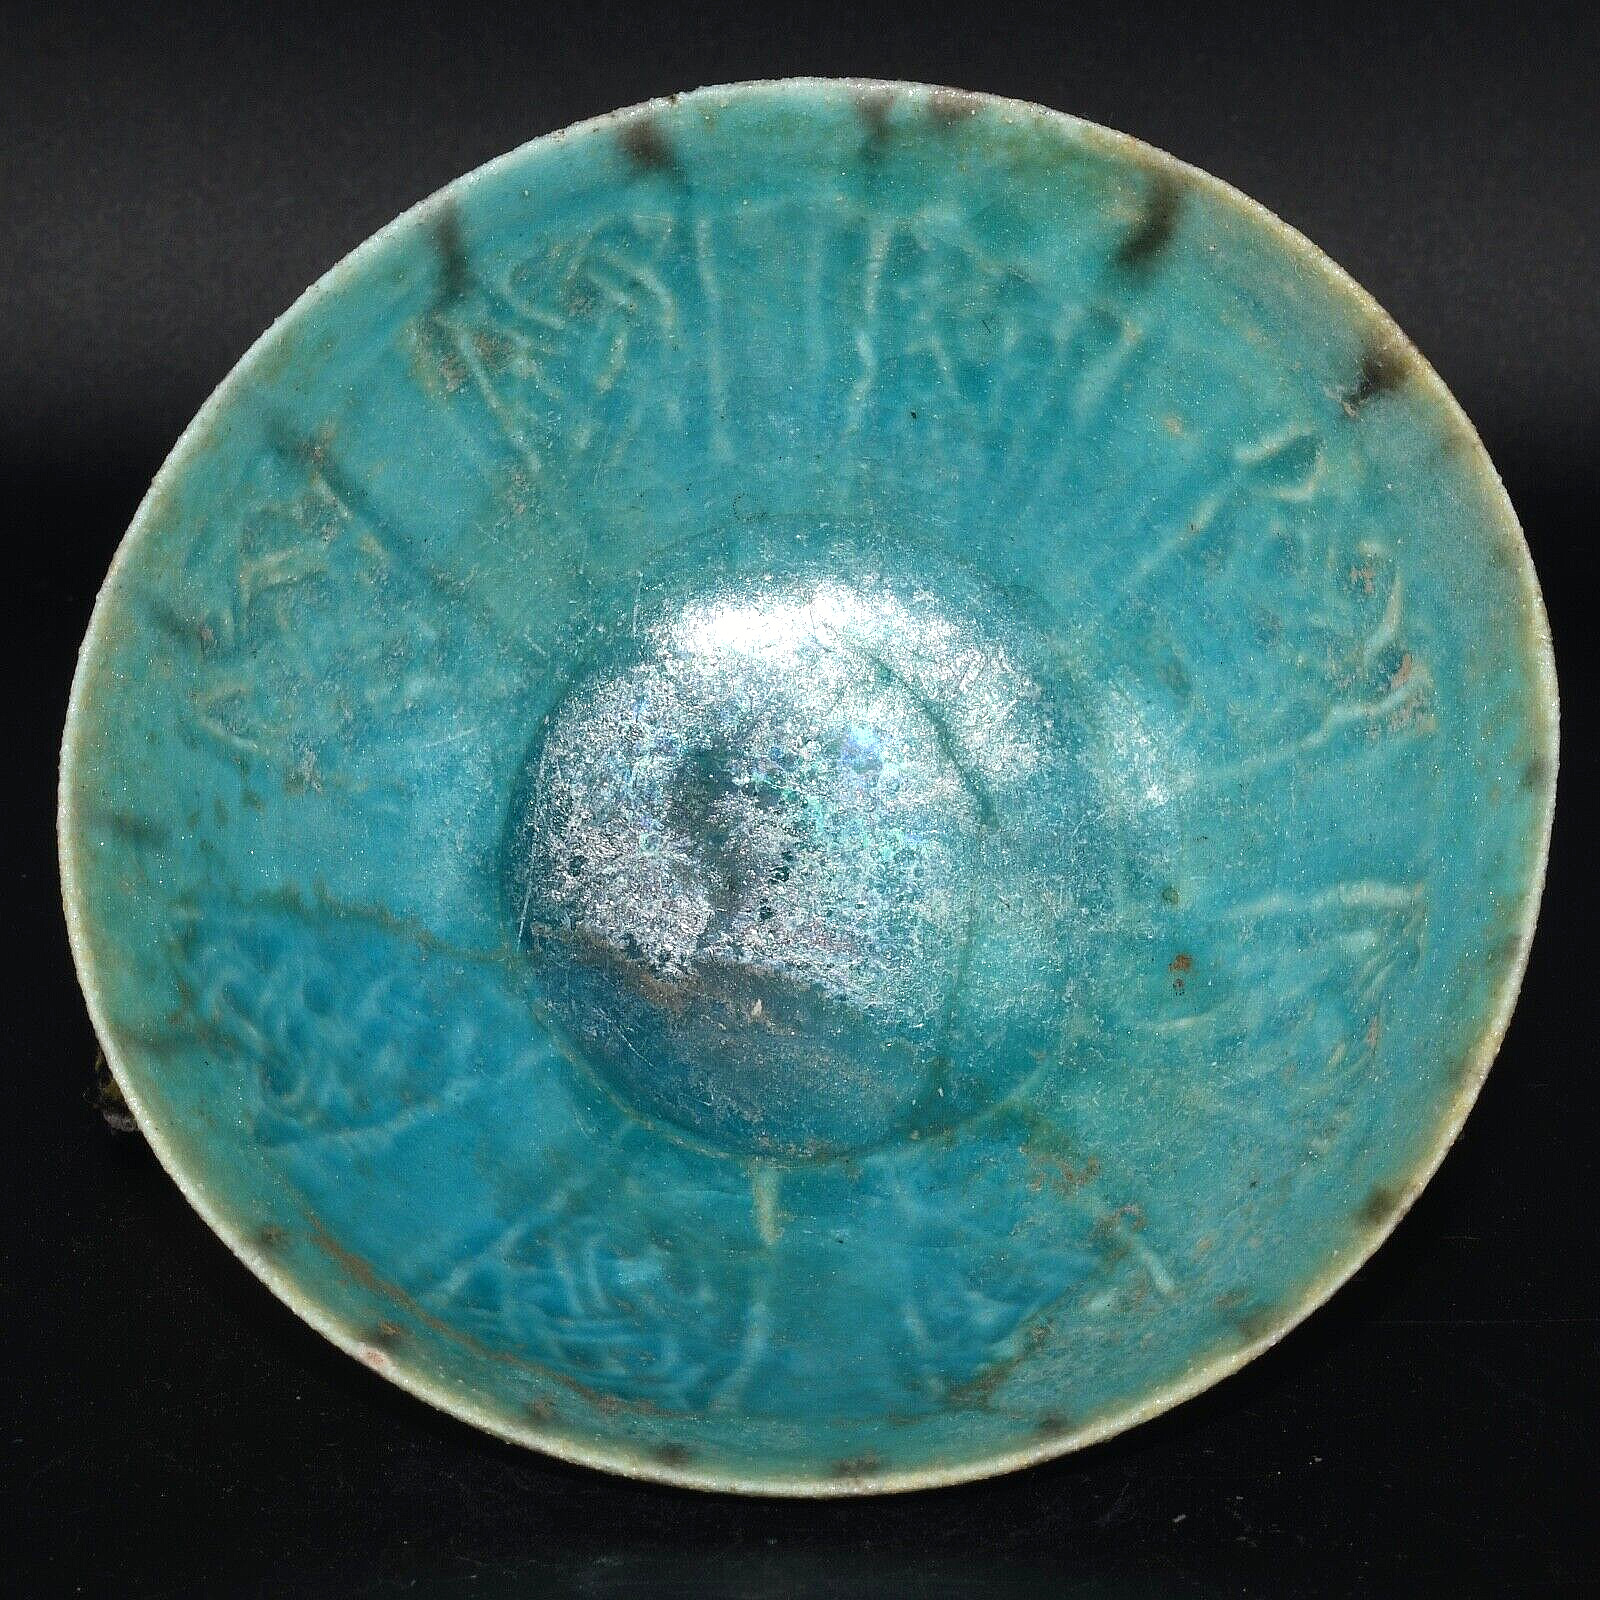 Intact Authentic Ancient Islamic Kashan Period Turquoise Glazed Ceramic Bowl